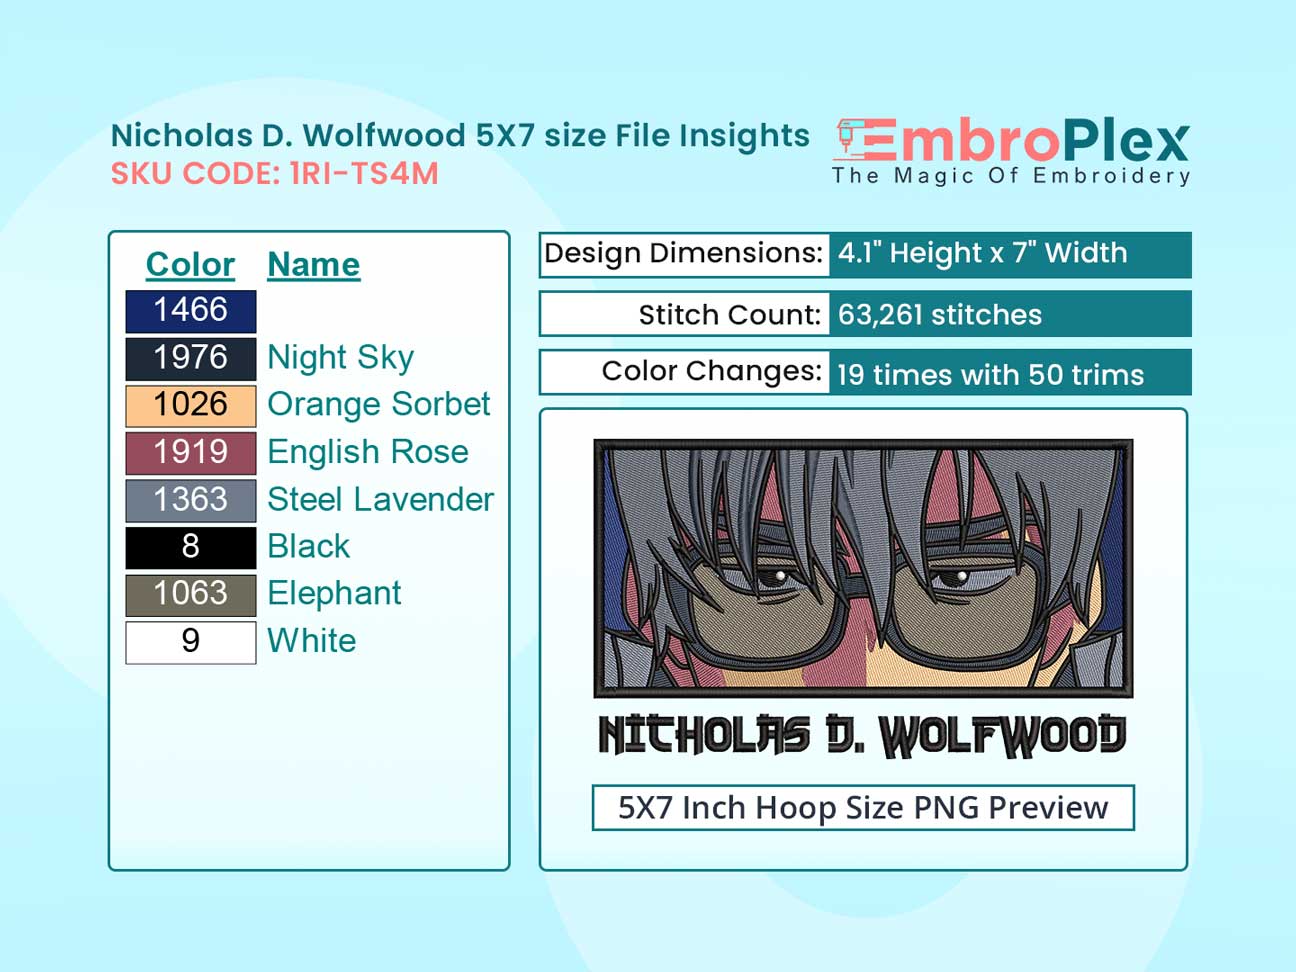 Anime-Inspired Nicholas D. Wolfwood Embroidery Design File - 5x7 Inch hoop Size Variation overview image